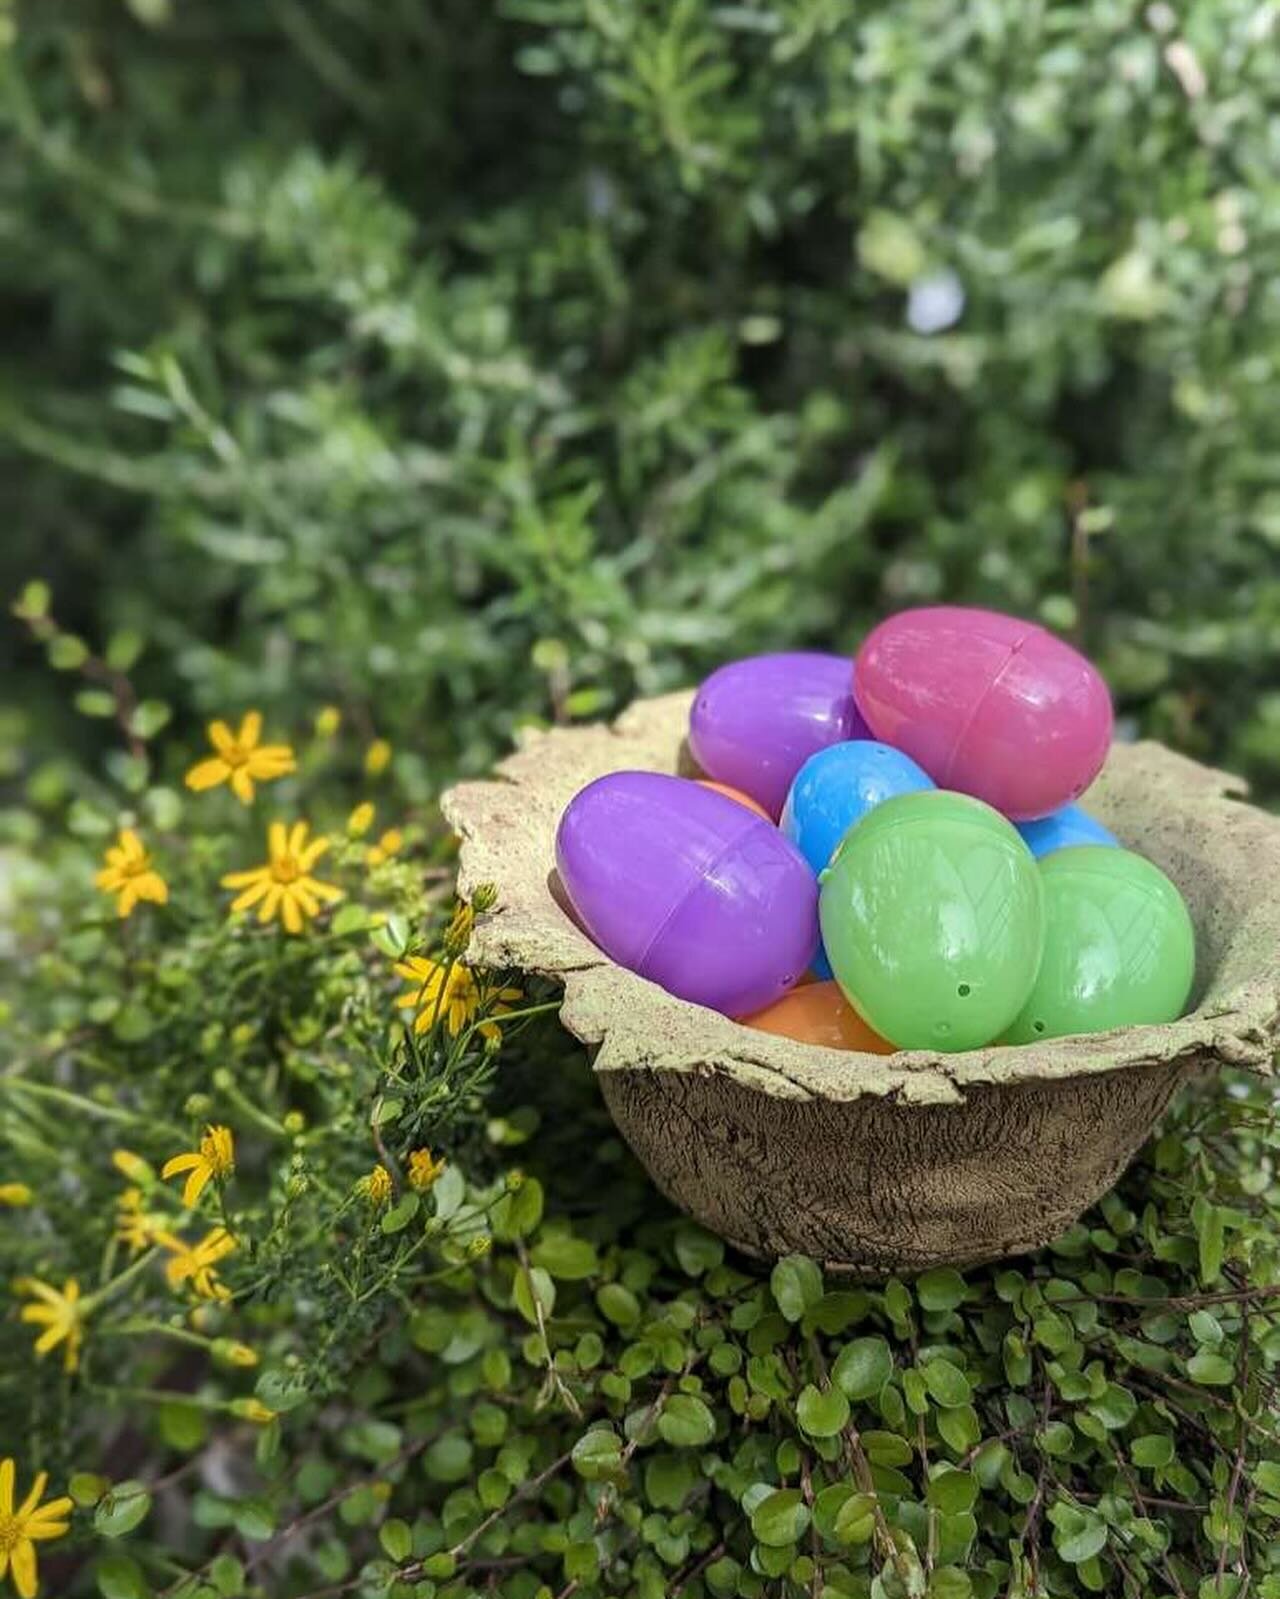 Easter egg hunt going down on Sunday&hellip;
Swoop up yeggs with&hellip;
- Shop Discounts
- Dig It Gear
- Sweet Treats and more

Rain or shine!